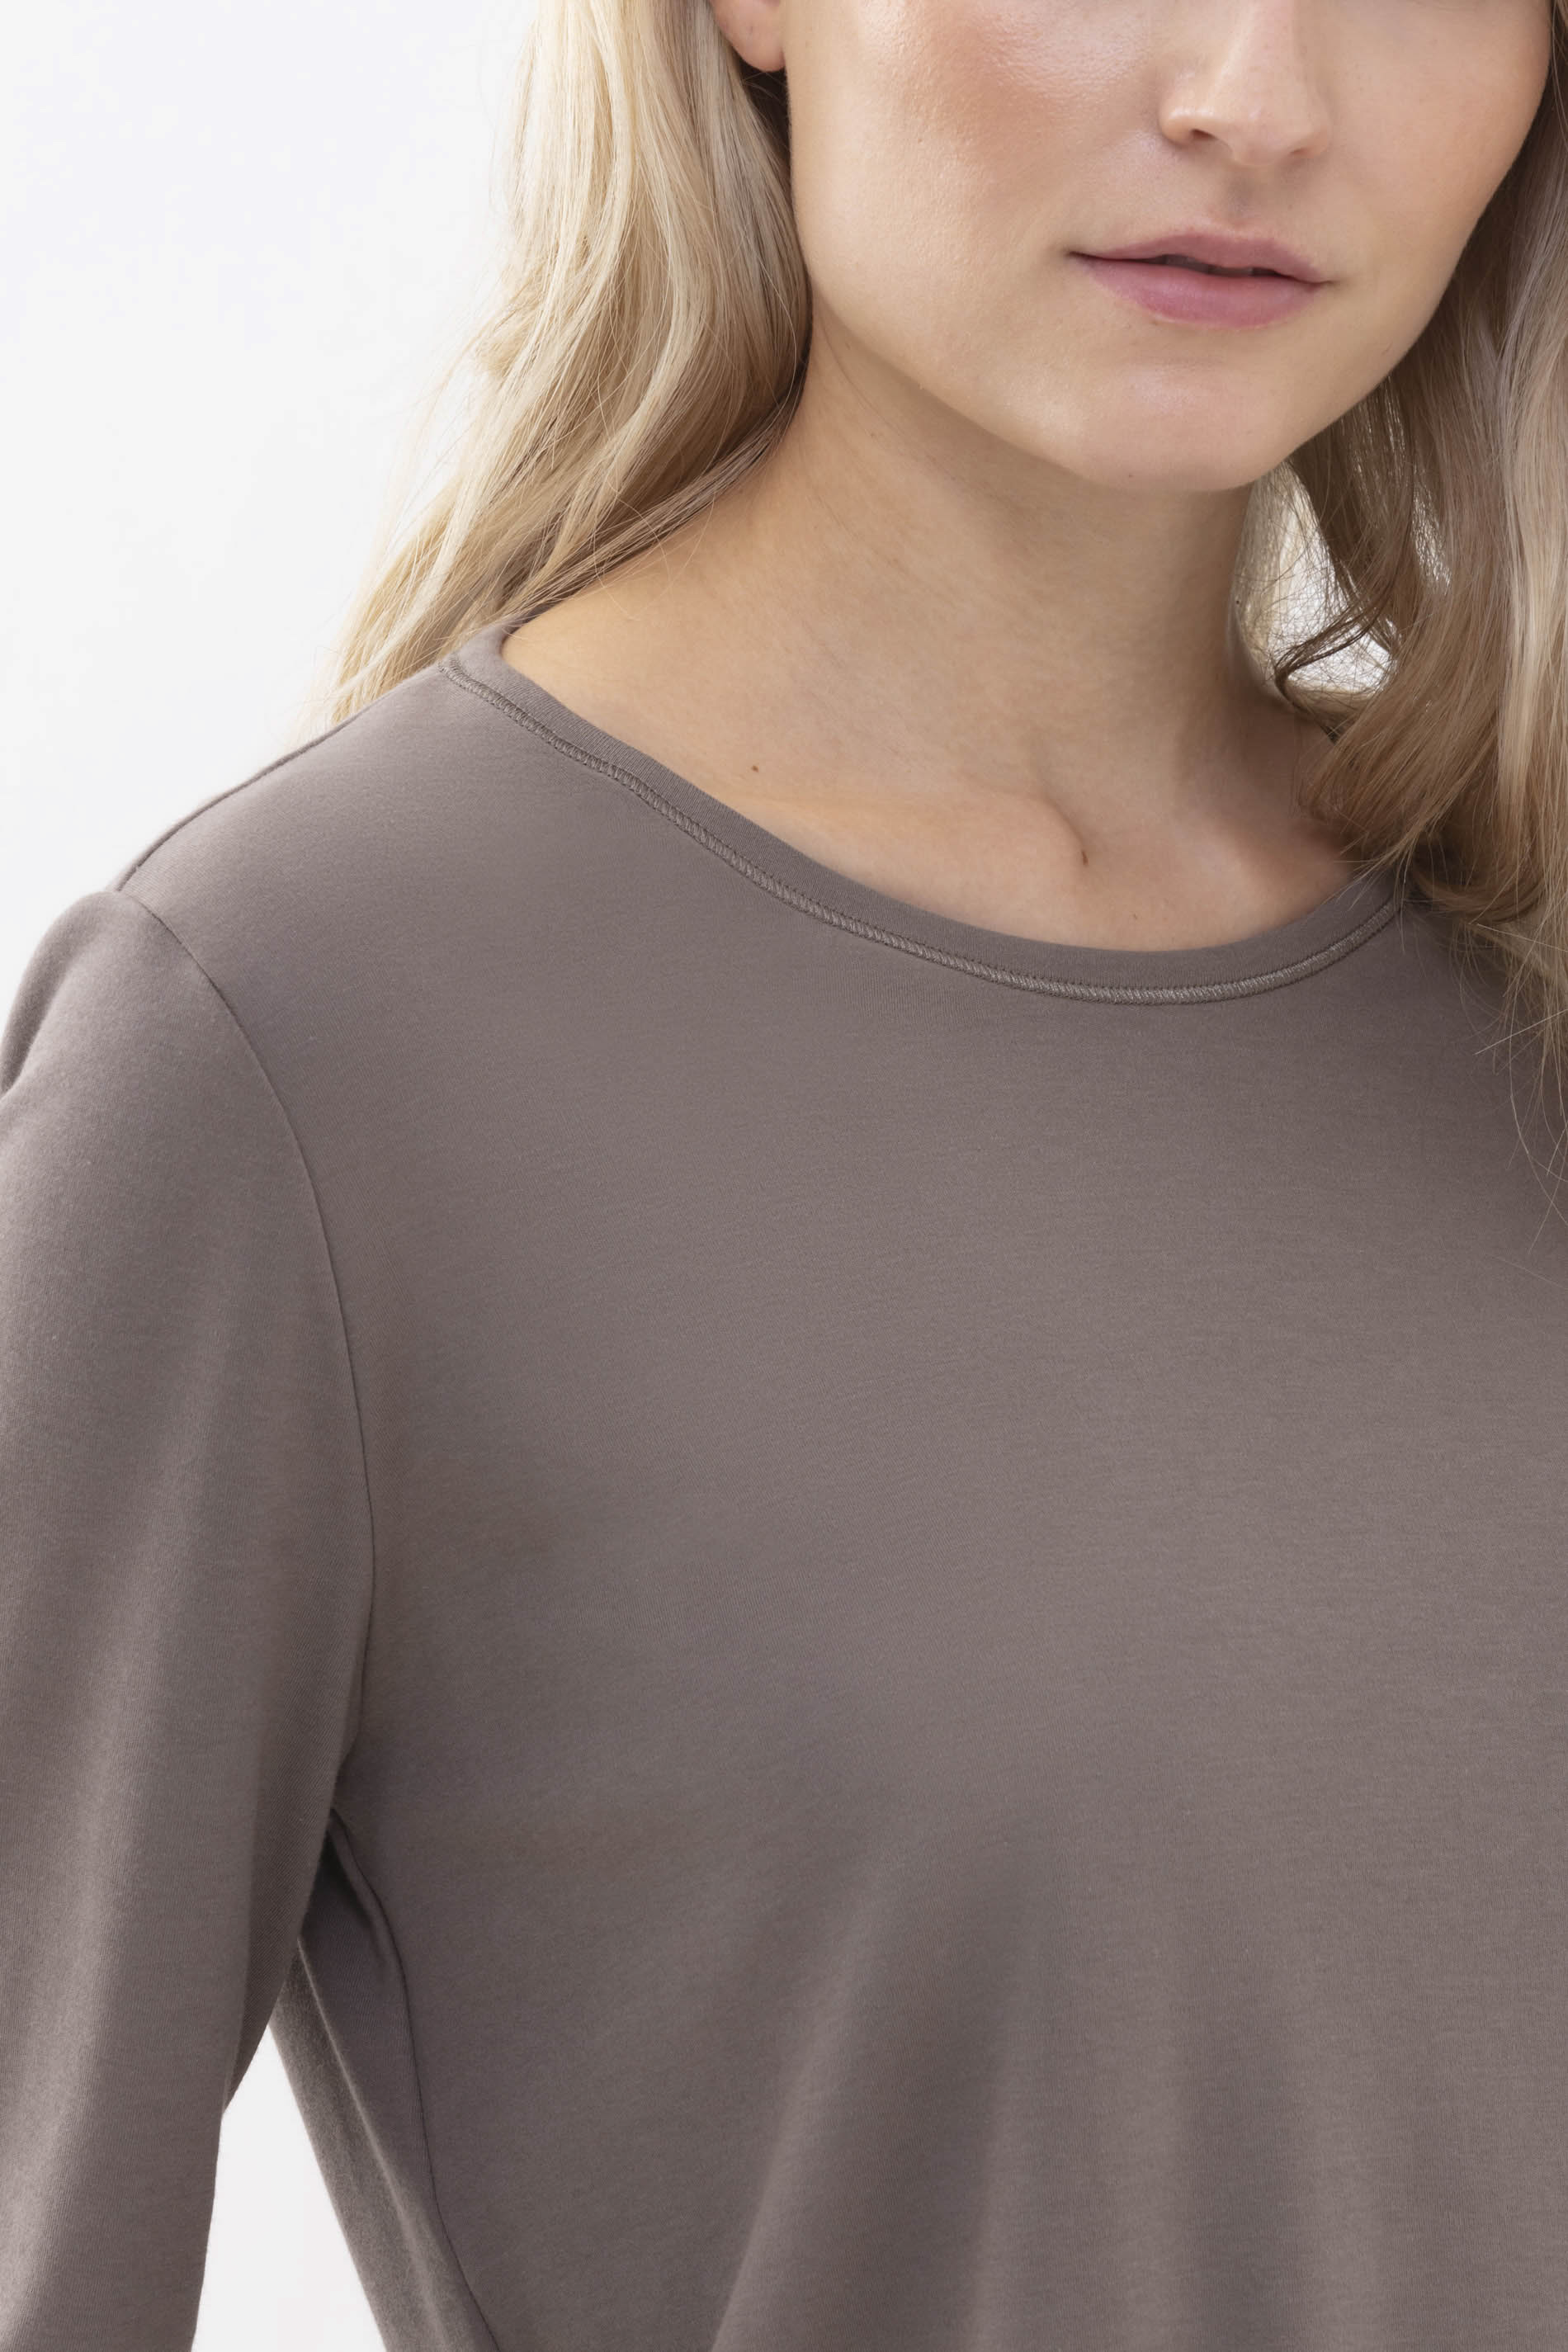 Shirt with full-length sleeves Deep Taupe Serie N8TEX 2.0 Detail View 01 | mey®